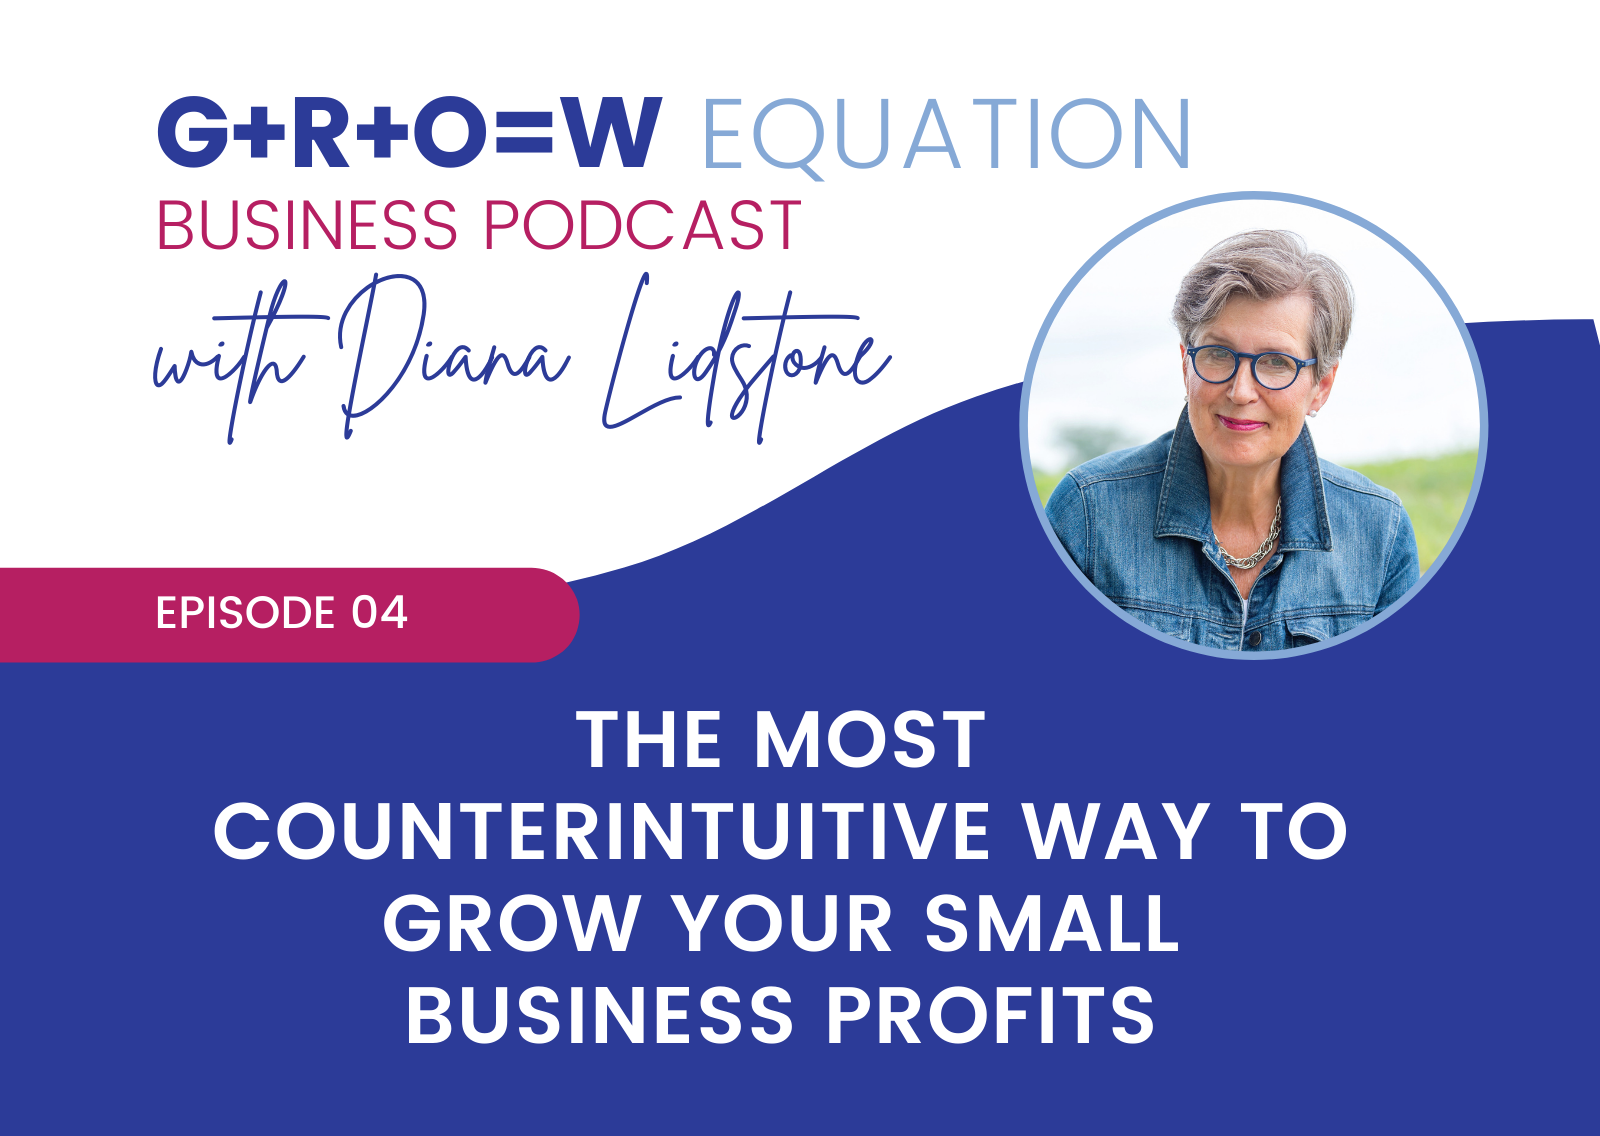 The Most Counterintuitive Way to Grow Your Small Business Profits